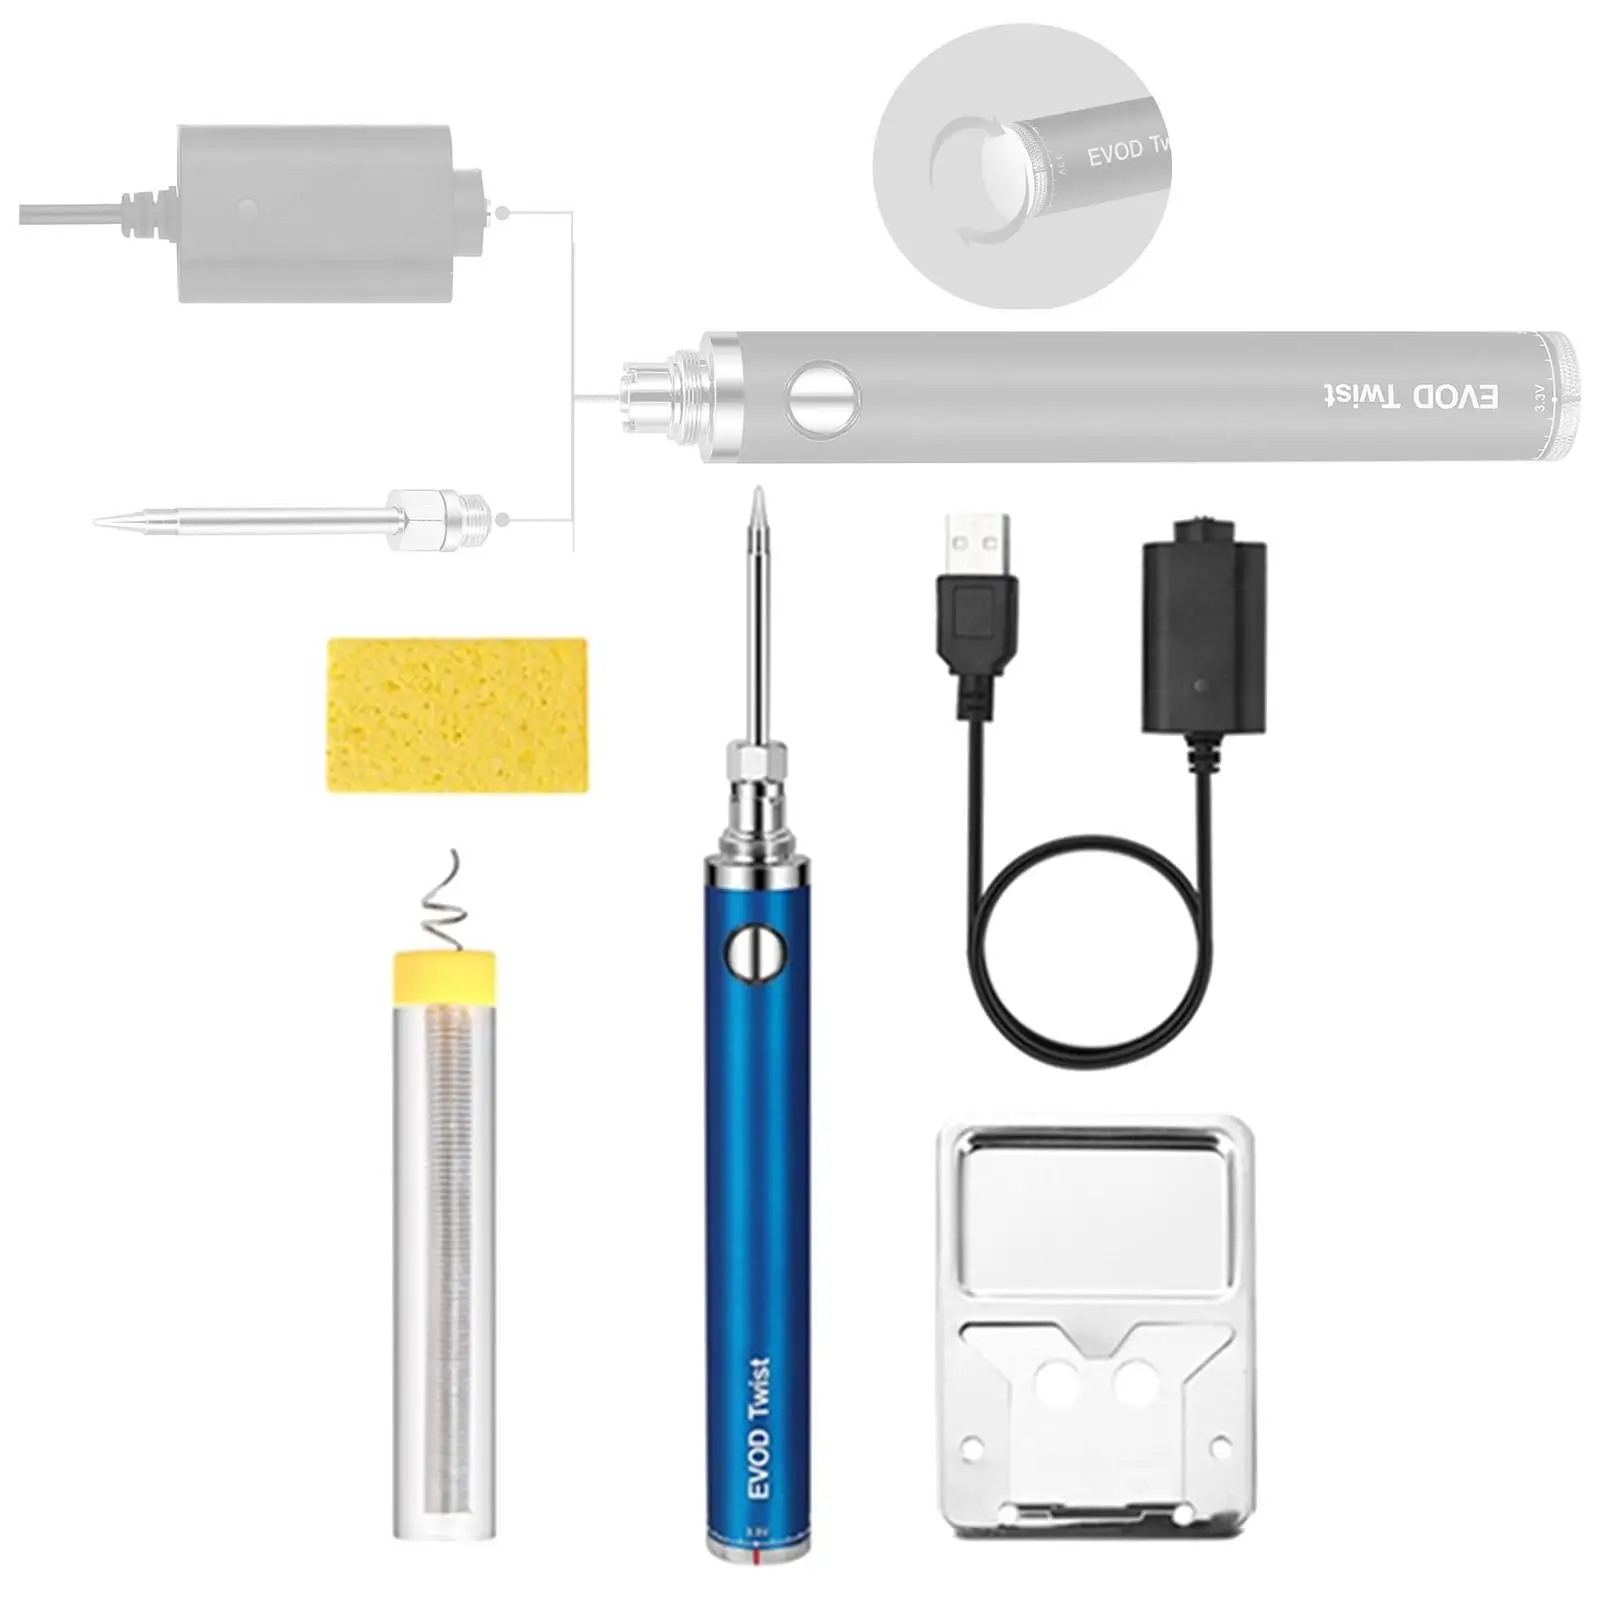 Electric Soldering Iron Kit 5V 8W Adjustable Temperature Fast Heating Tool Welding Set Repair Equipment for Projects SMD Work